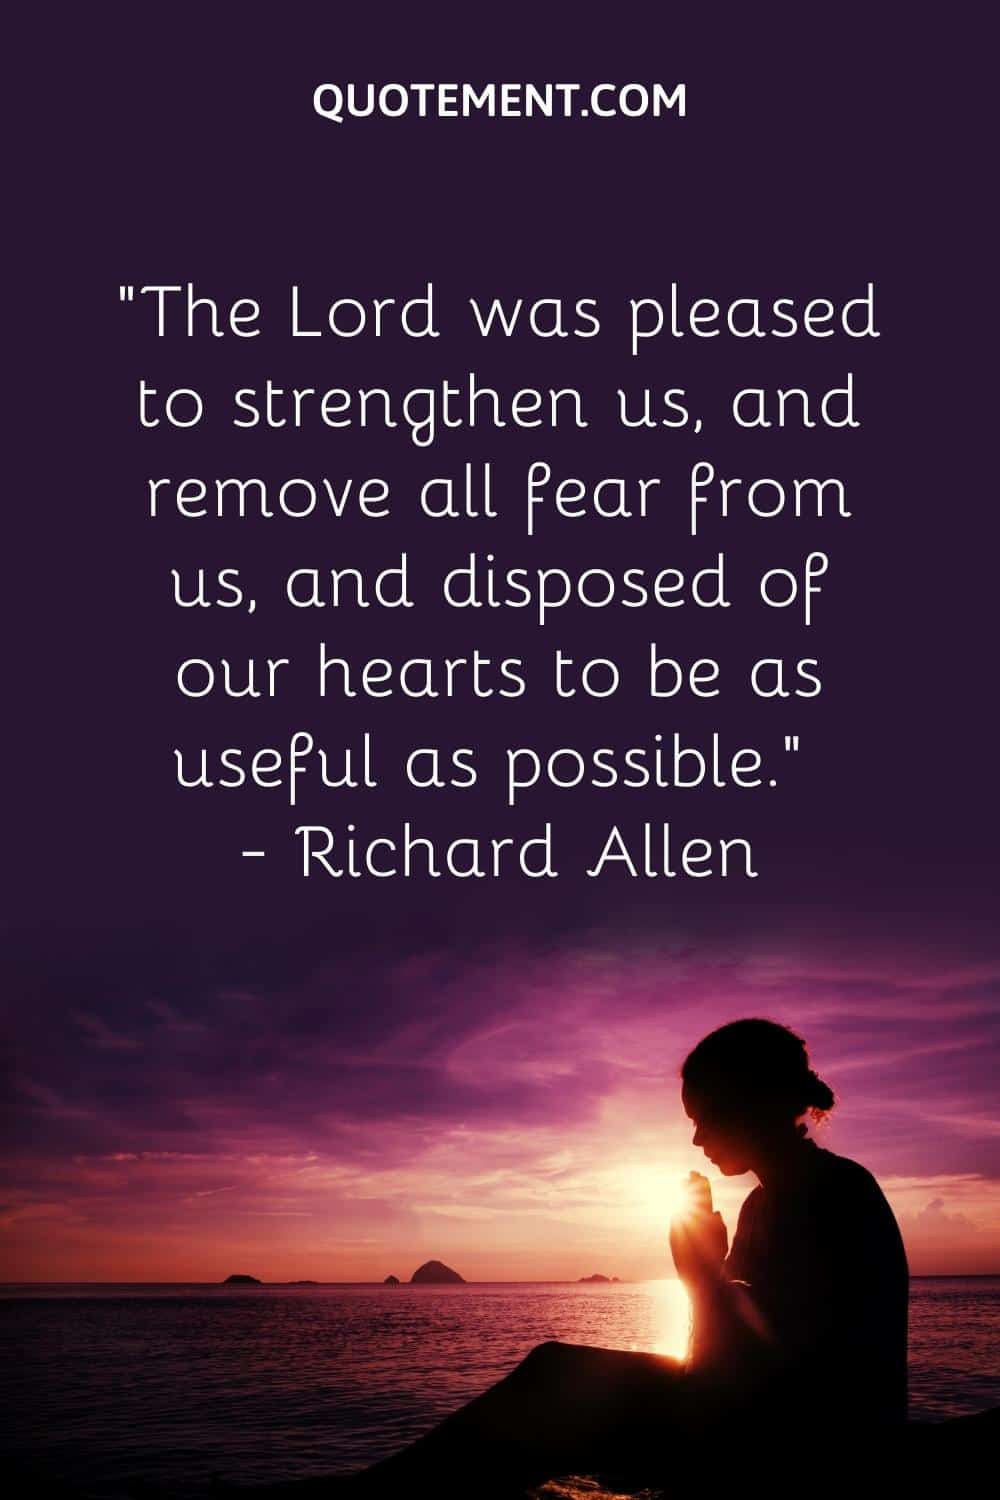 “The Lord was pleased to strengthen us, and remove all fear from us, and disposed of our hearts to be as useful as possible.” — Richard Allen